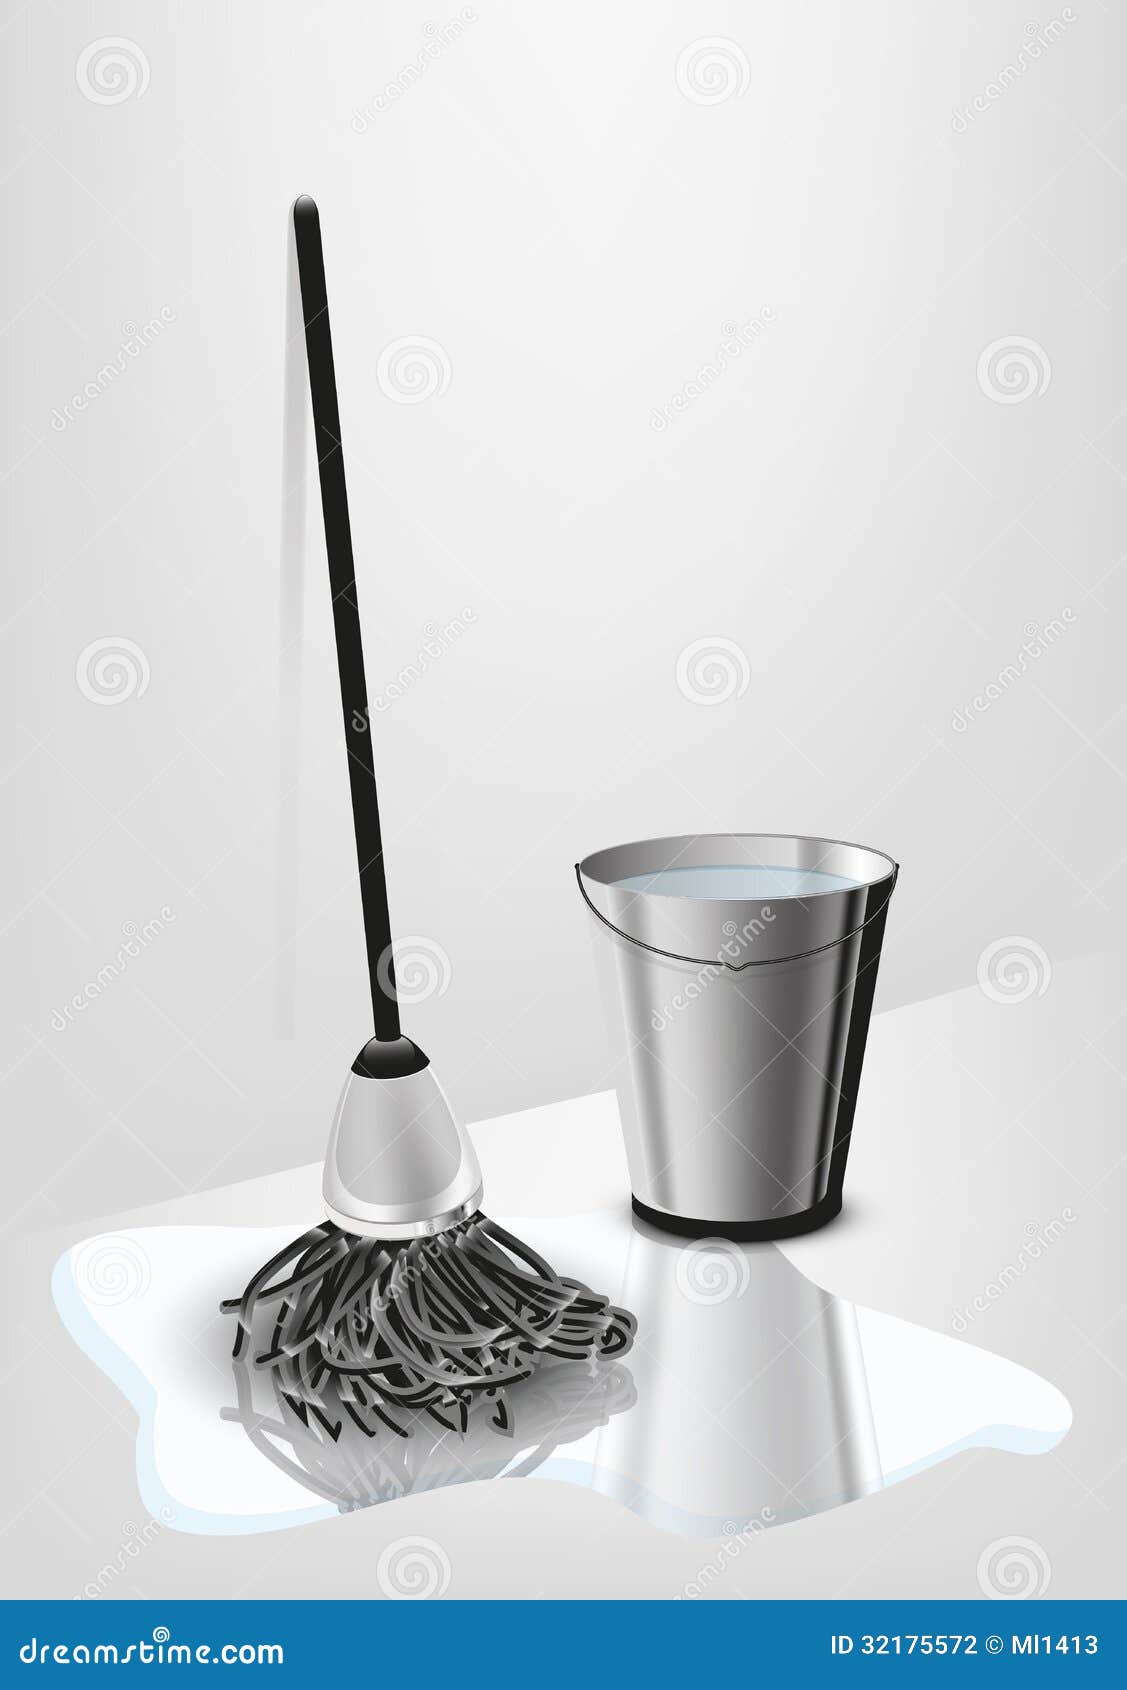 Mop and bucket vector illustration eps 10 abstract form.